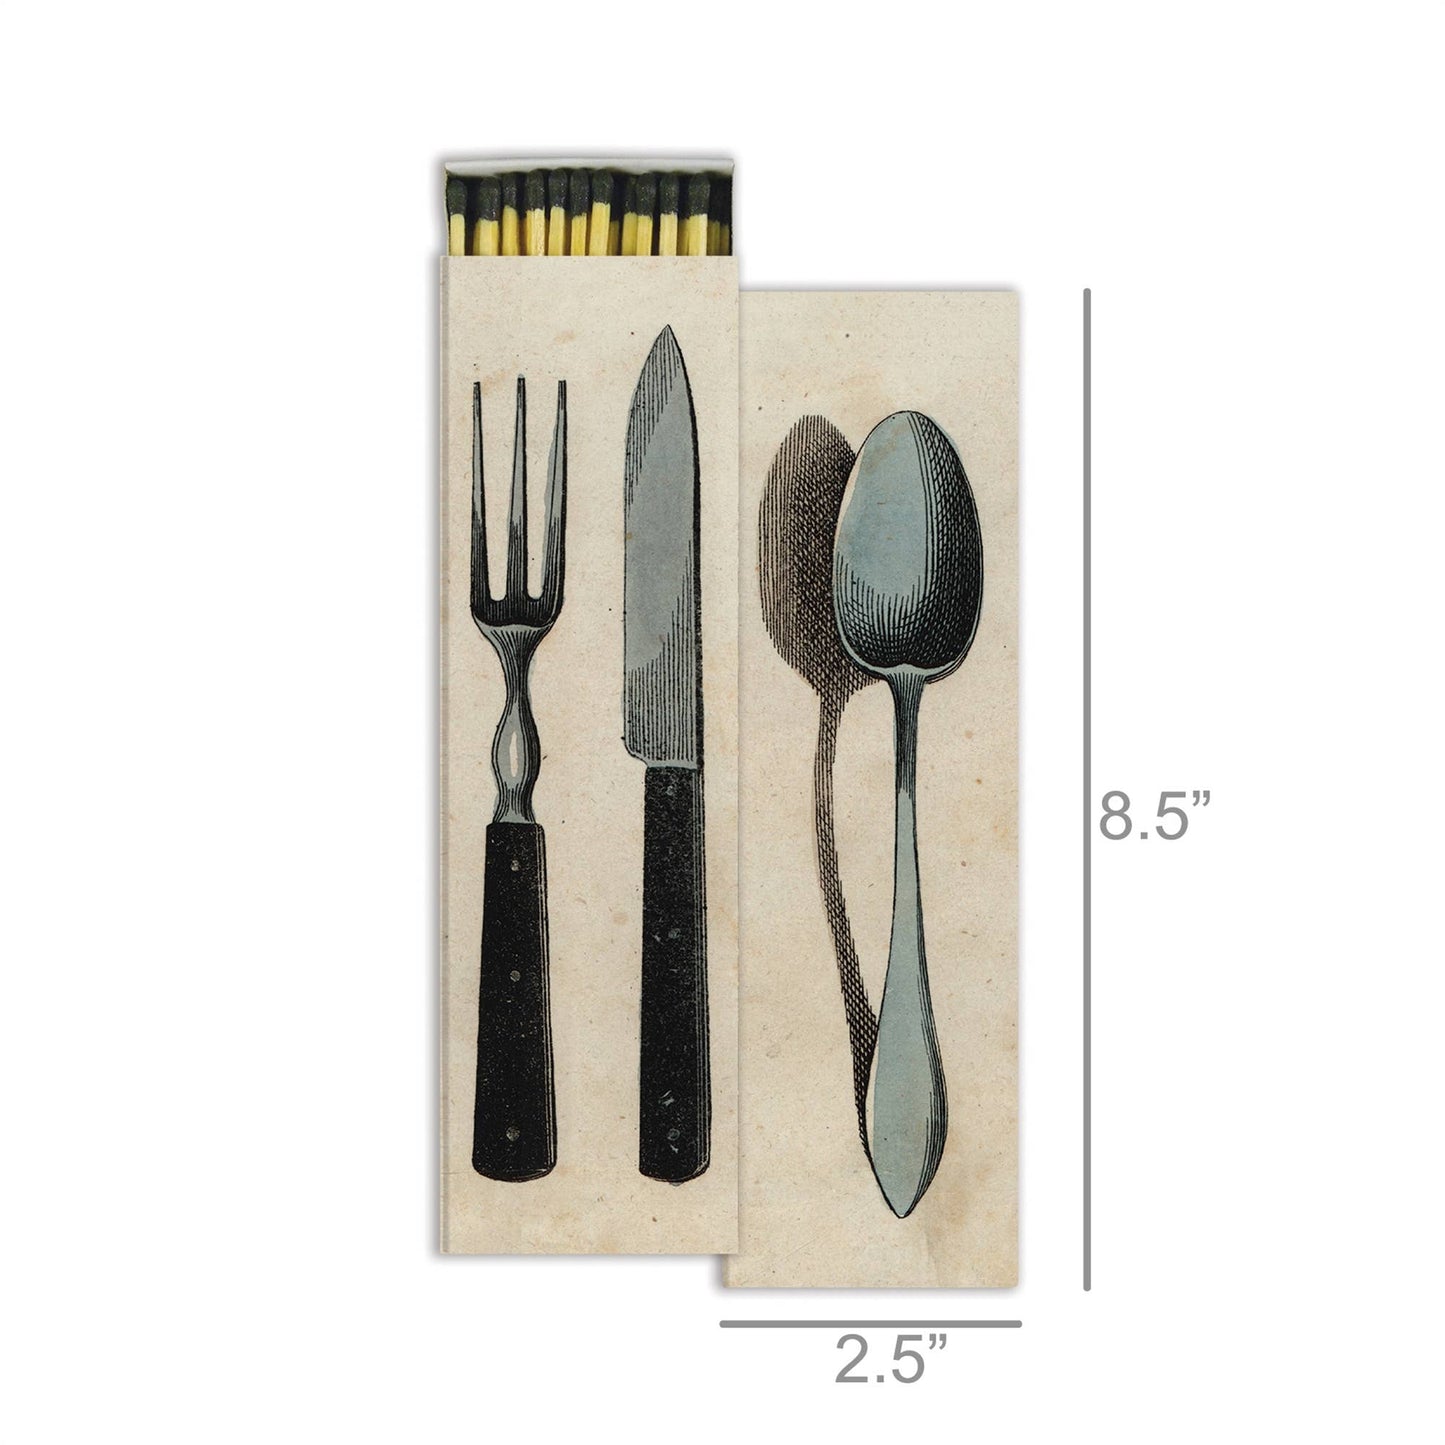 Silverware Fork Knife Spoon Long Matches